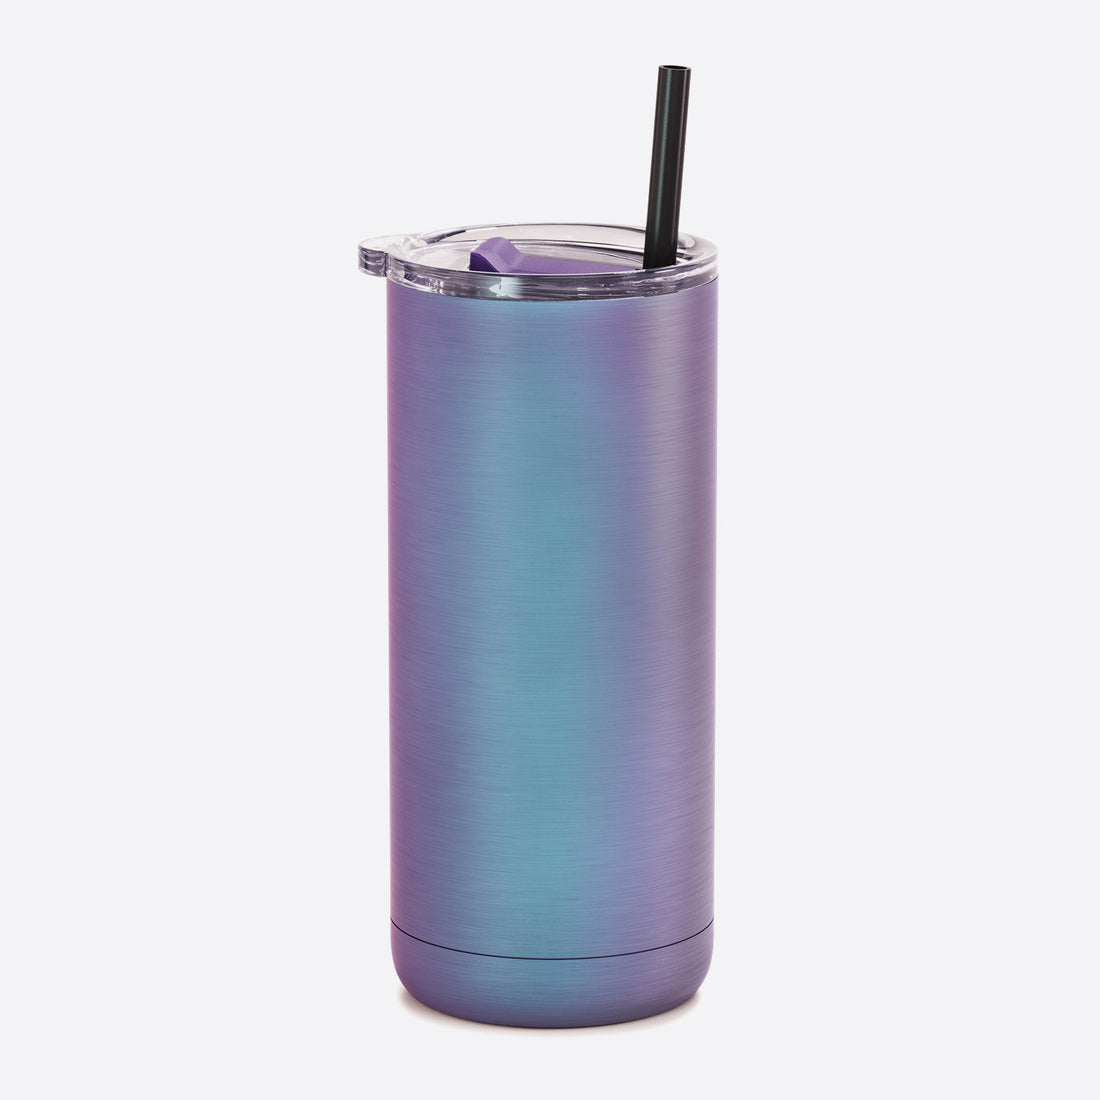 Iridescent purple and teal tumbler with straw.